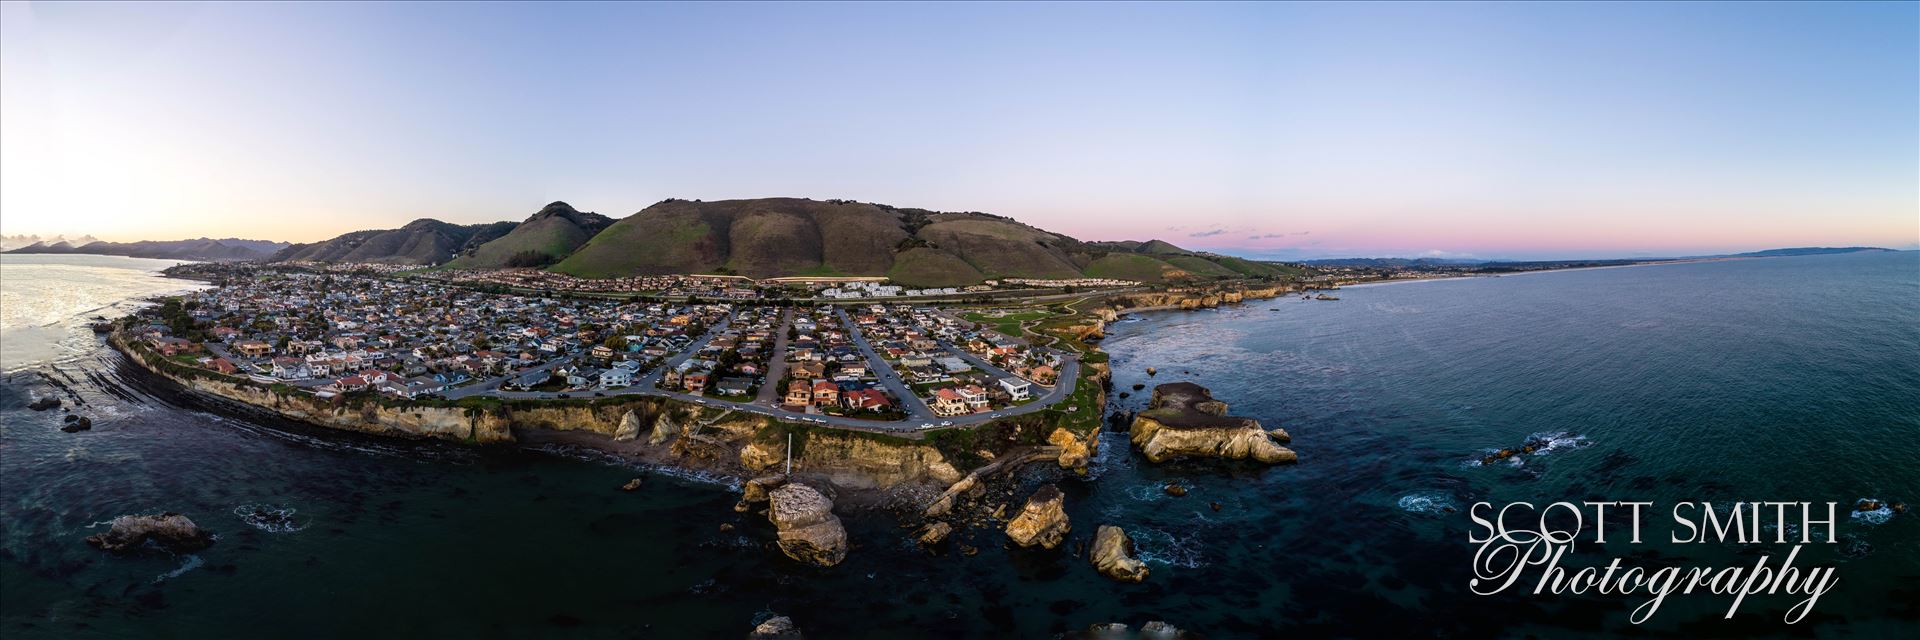 Aerial of Shell Beach, California Near sunset, at Shell Beach, California.  Composite of 21 high res images from a Phantom 4 Pro.  This is a super high resolution image at over 16k by 4k pixels. by Scott Smith Photos